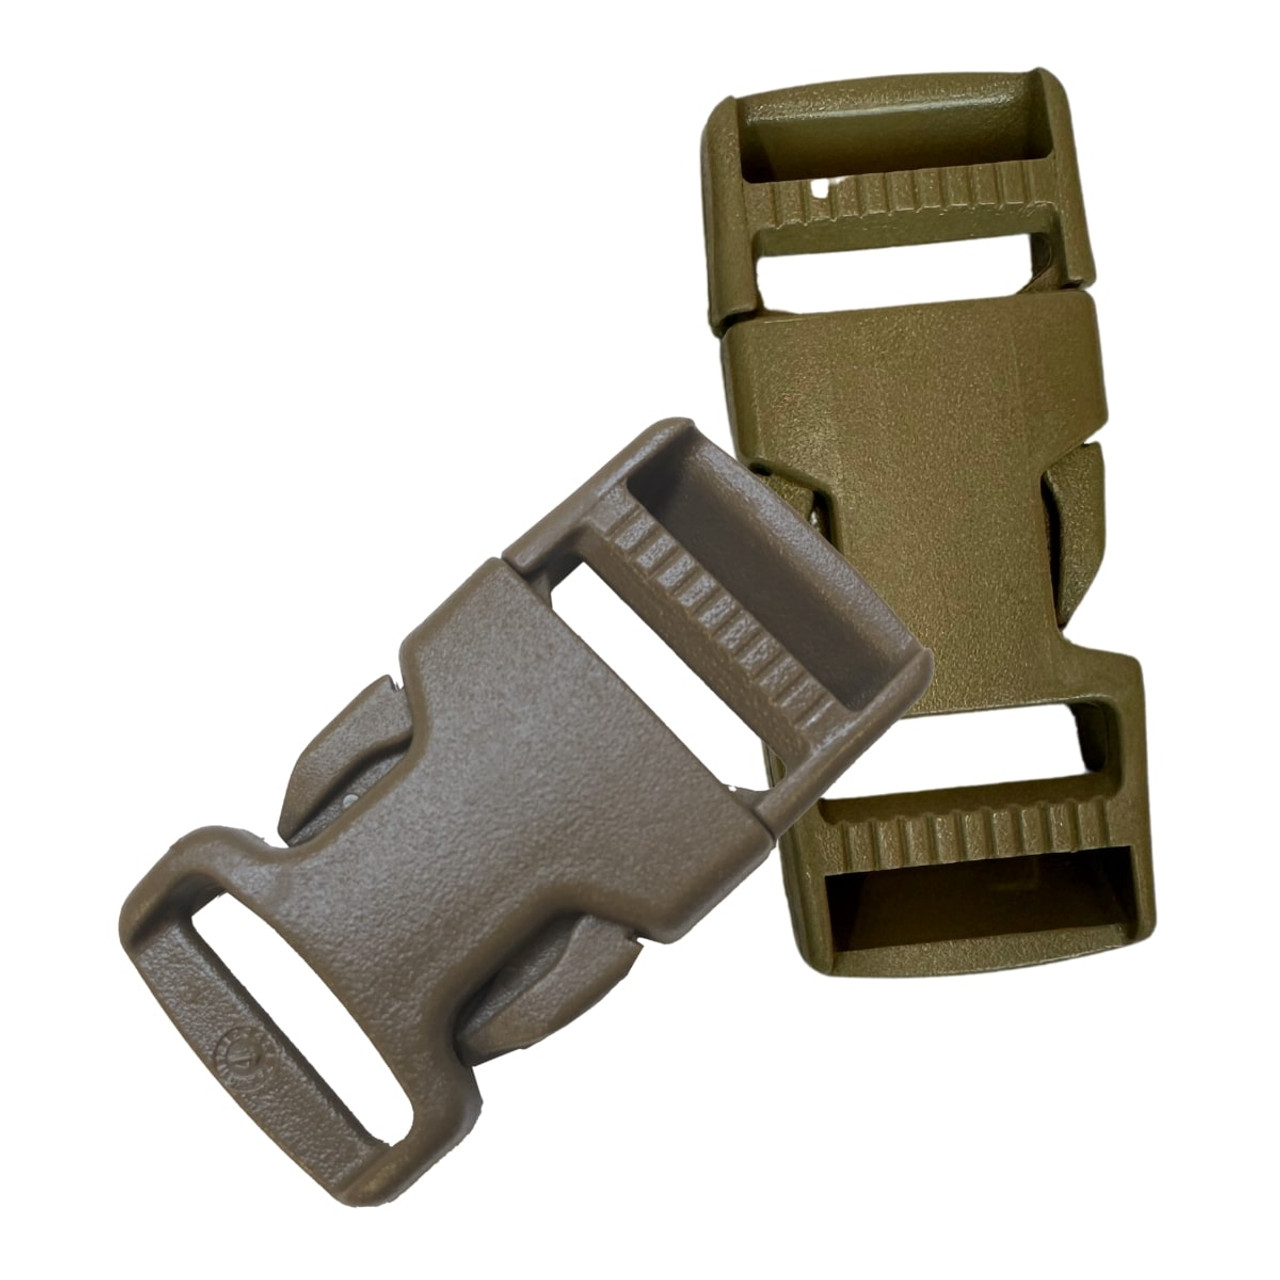 Side Release Buckle - 2 Inch (2-pack)